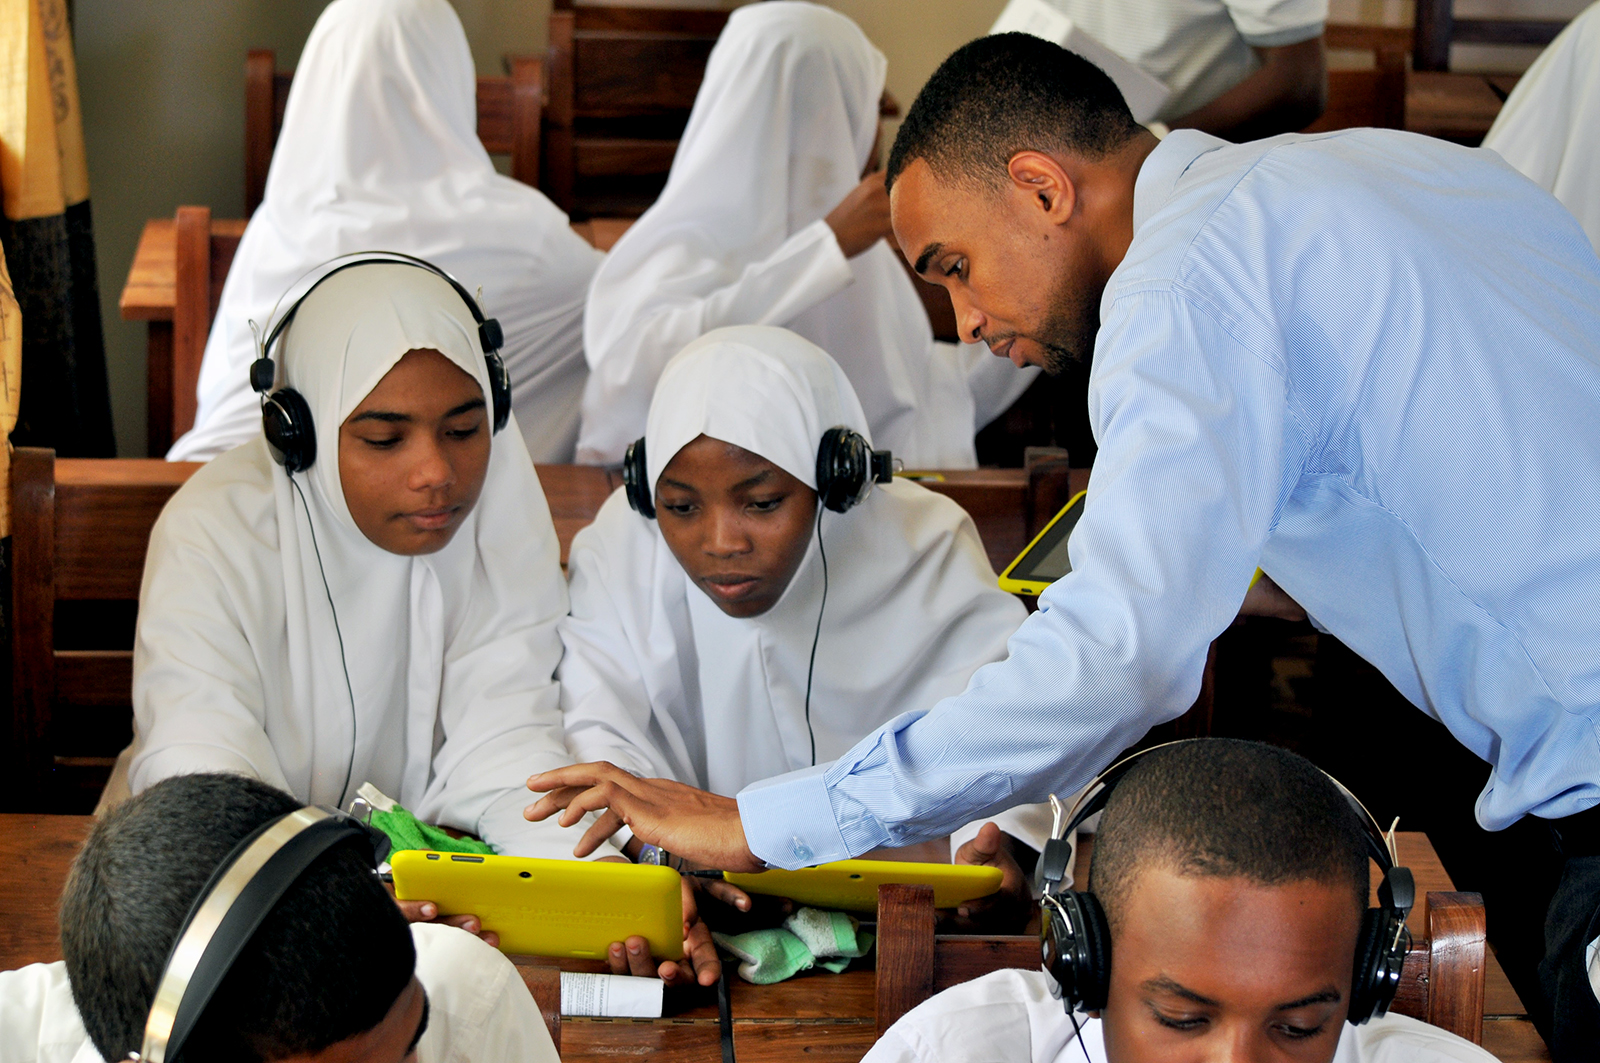 A Zanzibar classroom of students using Opportunity Tablets, provided by Opportunity Education, while a teacher works with two students, tapping the screen of their tablet.